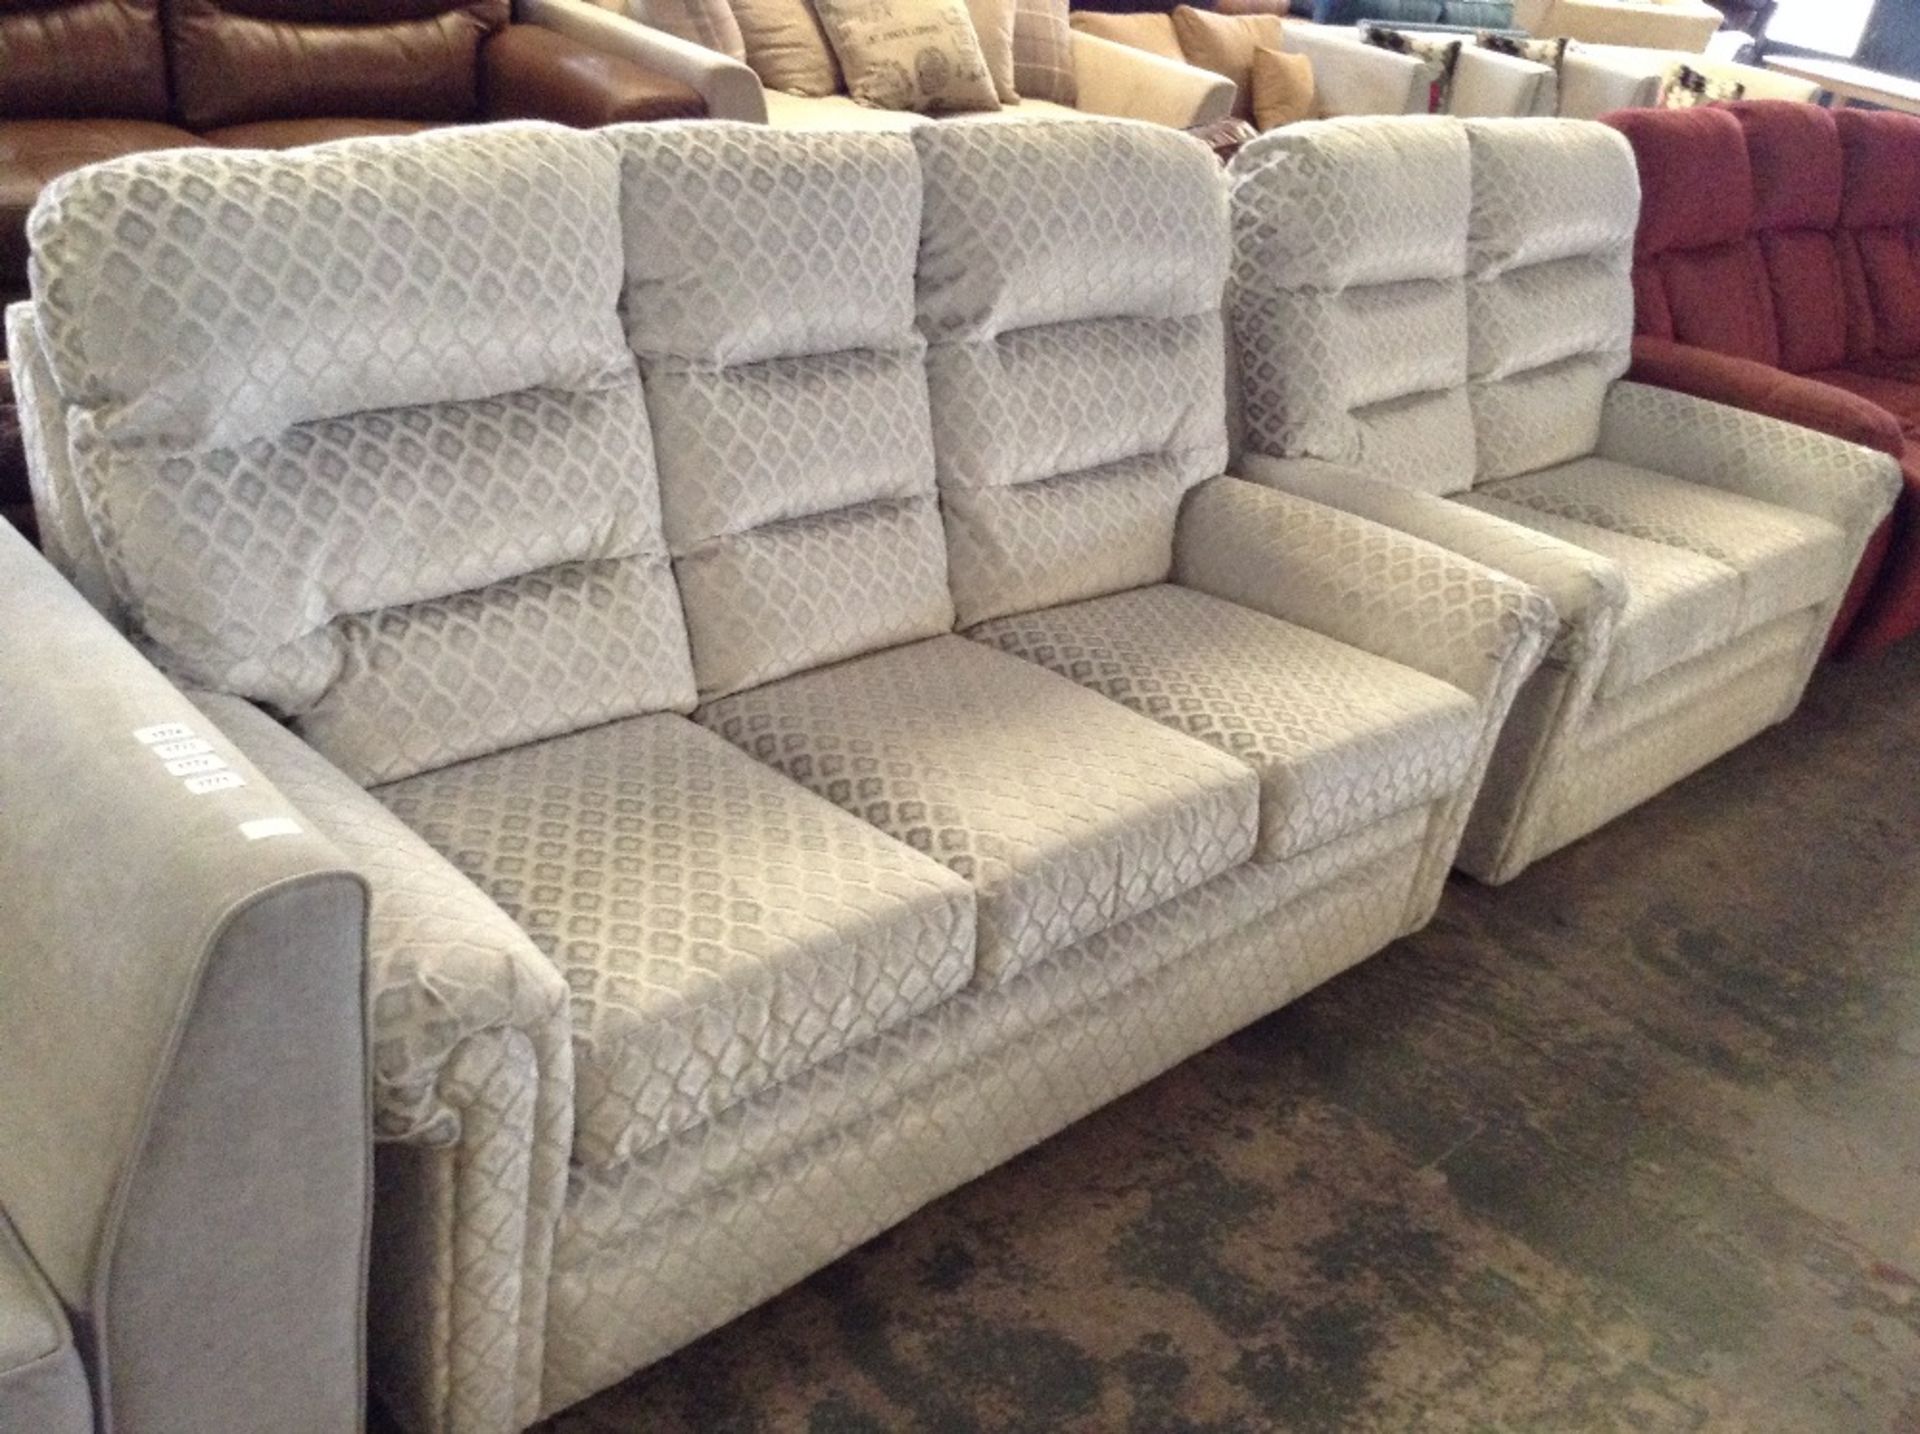 SILVER PATTERNED HIGH BACK 3 SEATER SOFA AND 2 SEA